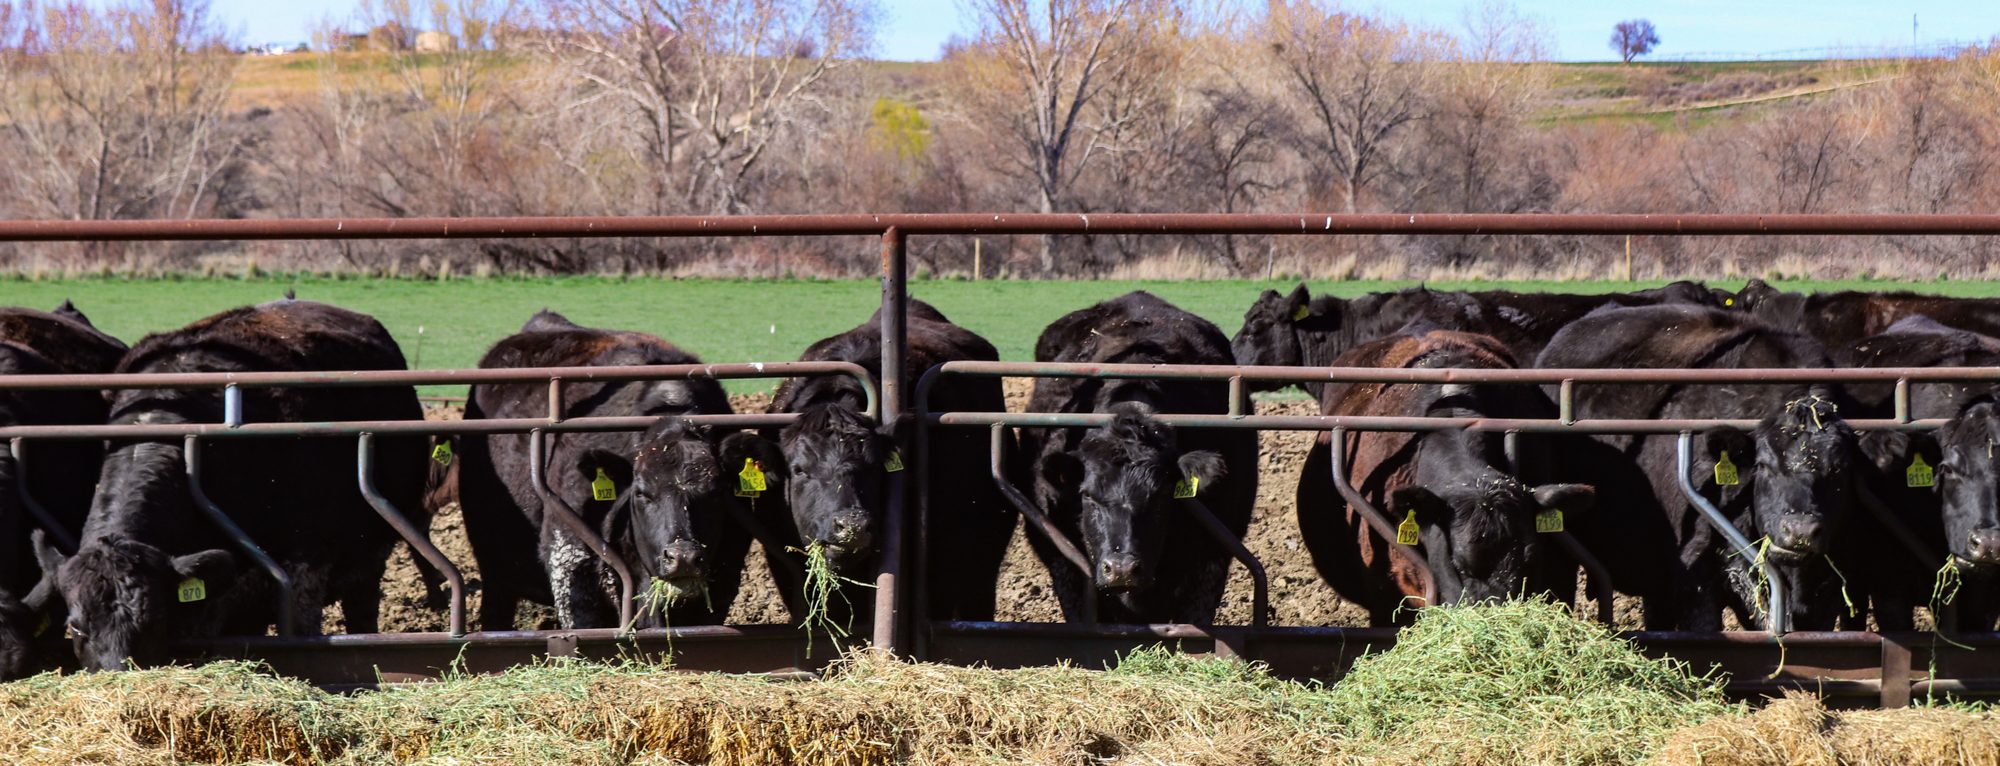 Cattle at Homedale Cattle Ranch